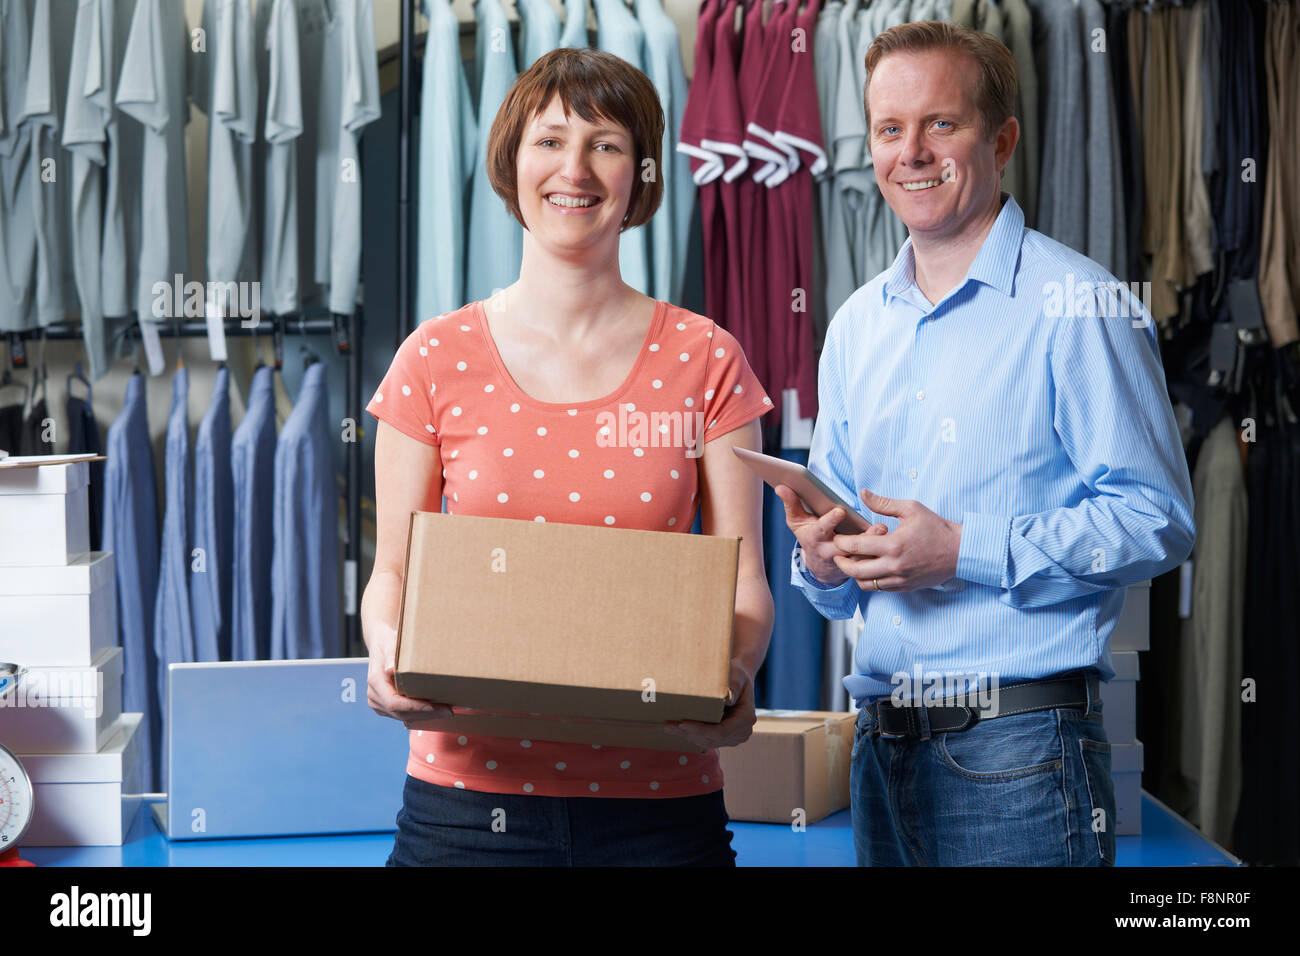 Couple Running On Line Clothing Store Stock Photo